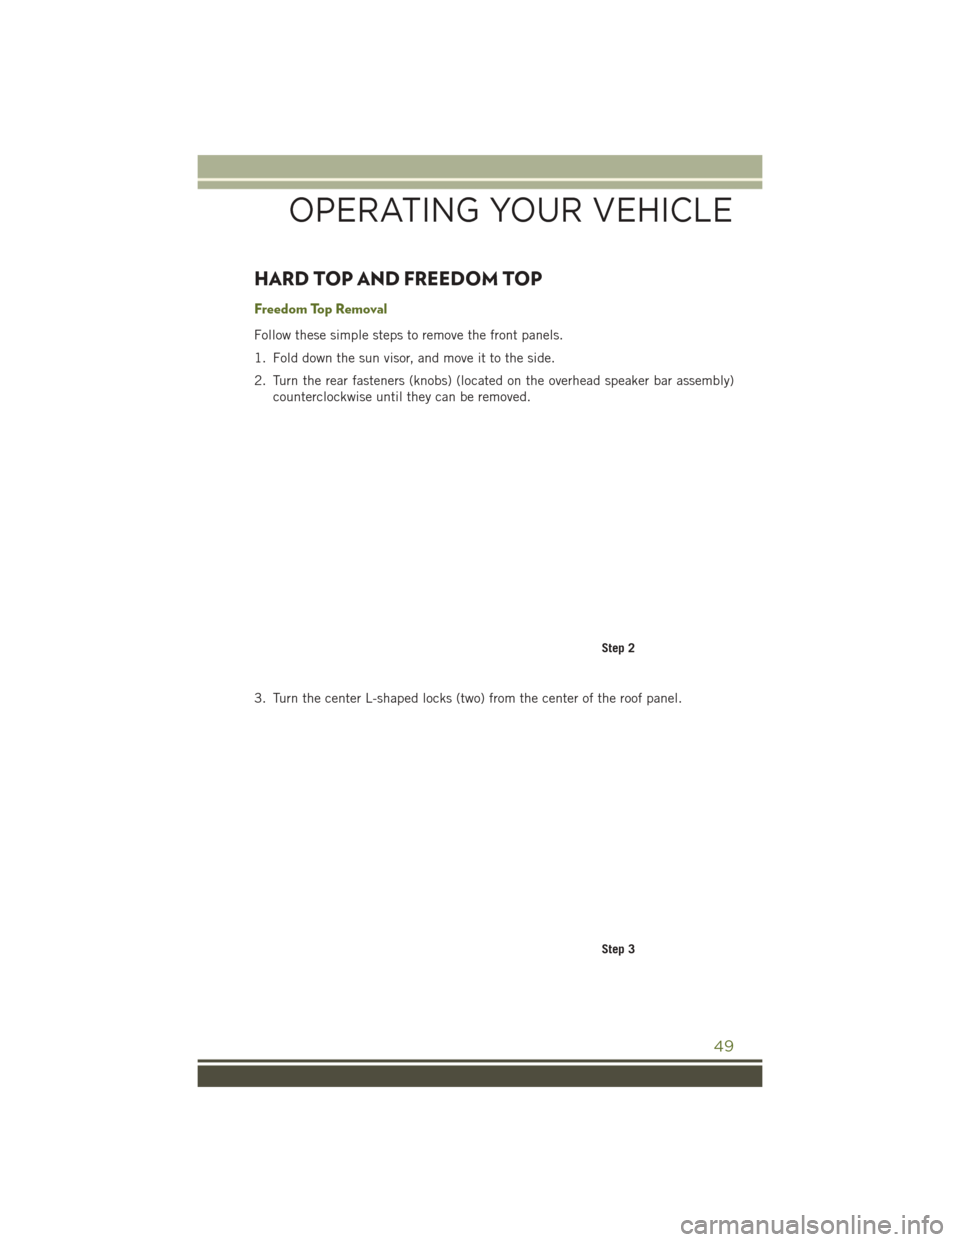 JEEP WRANGLER 2016 JK / 3.G User Guide HARD TOP AND FREEDOM TOP
Freedom Top Removal
Follow these simple steps to remove the front panels.
1. Fold down the sun visor, and move it to the side.
2. Turn the rear fasteners (knobs) (located on t